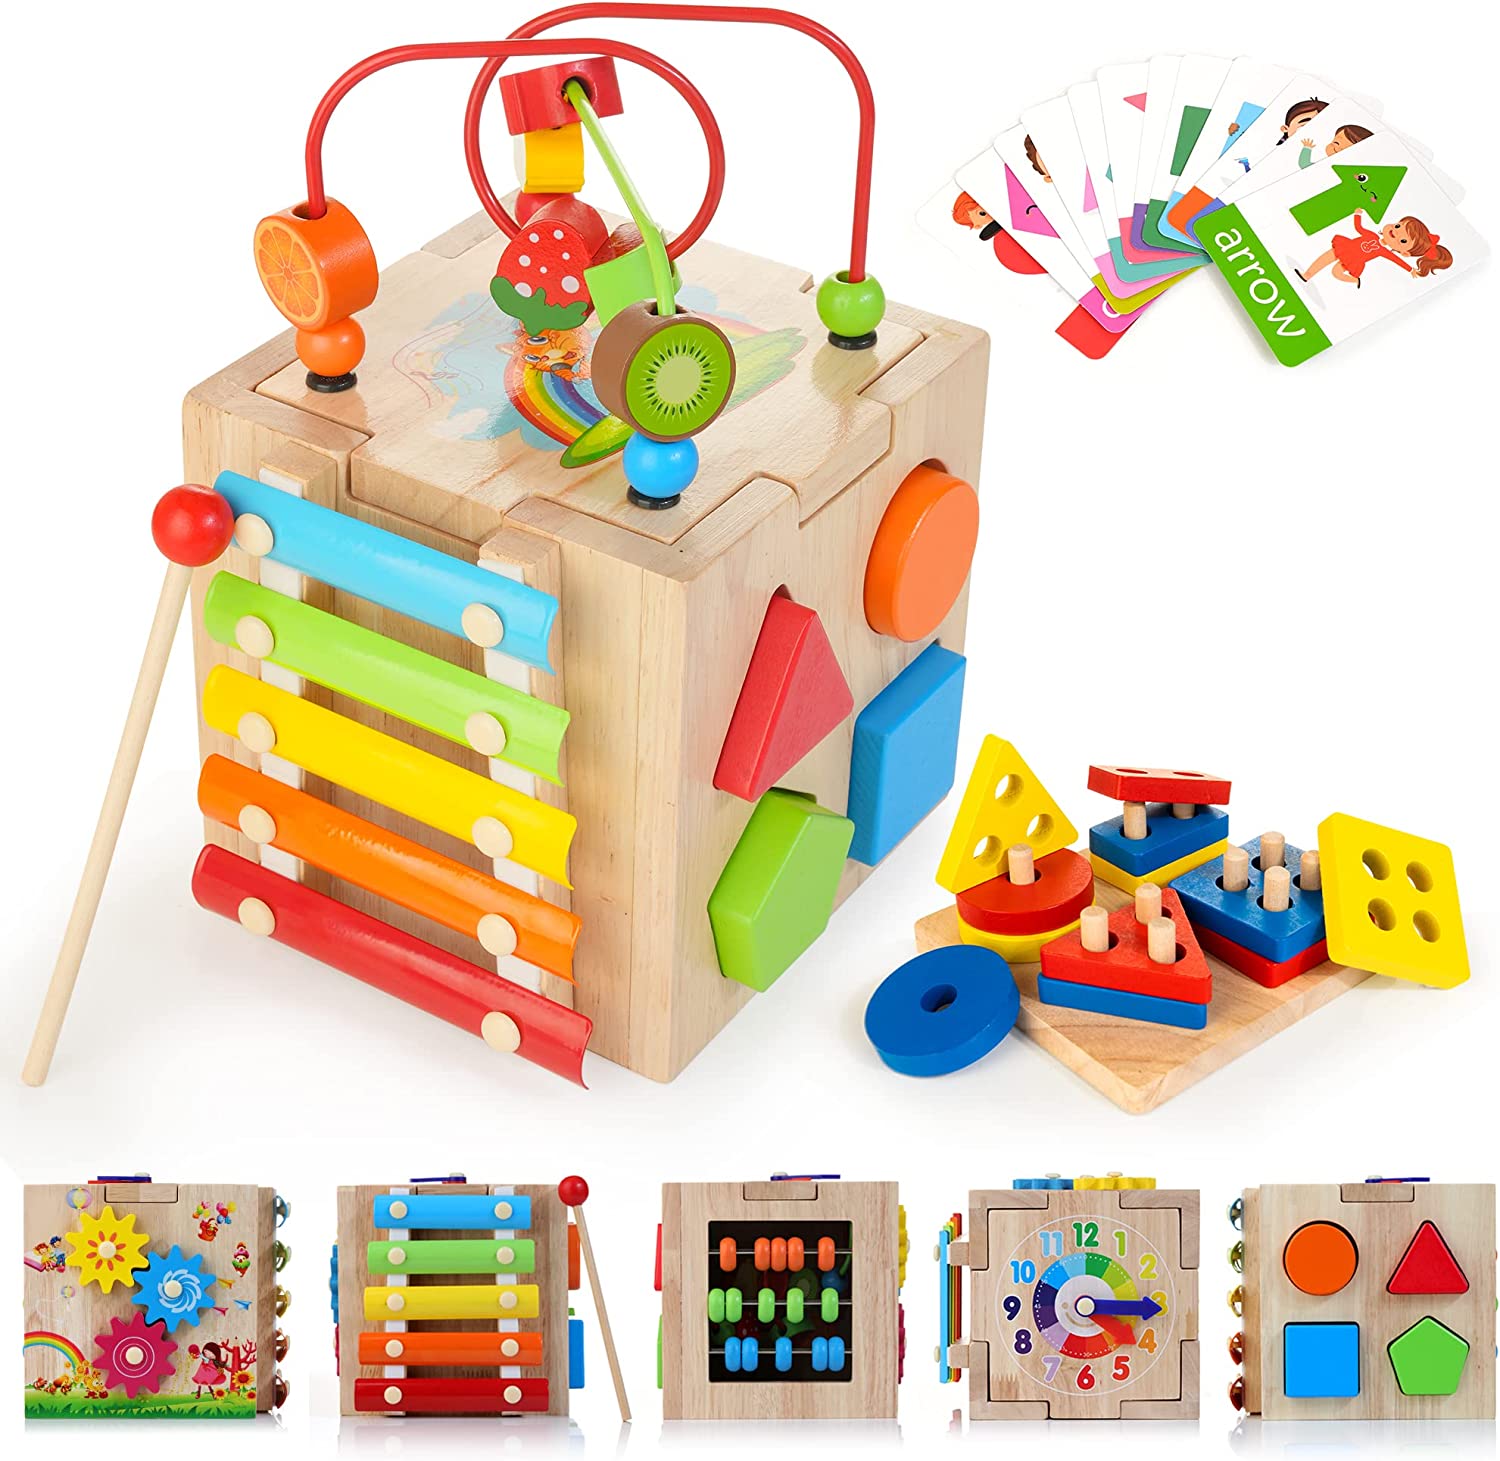 HELLOWOOD 8 in 1 Motor Activity Cube 